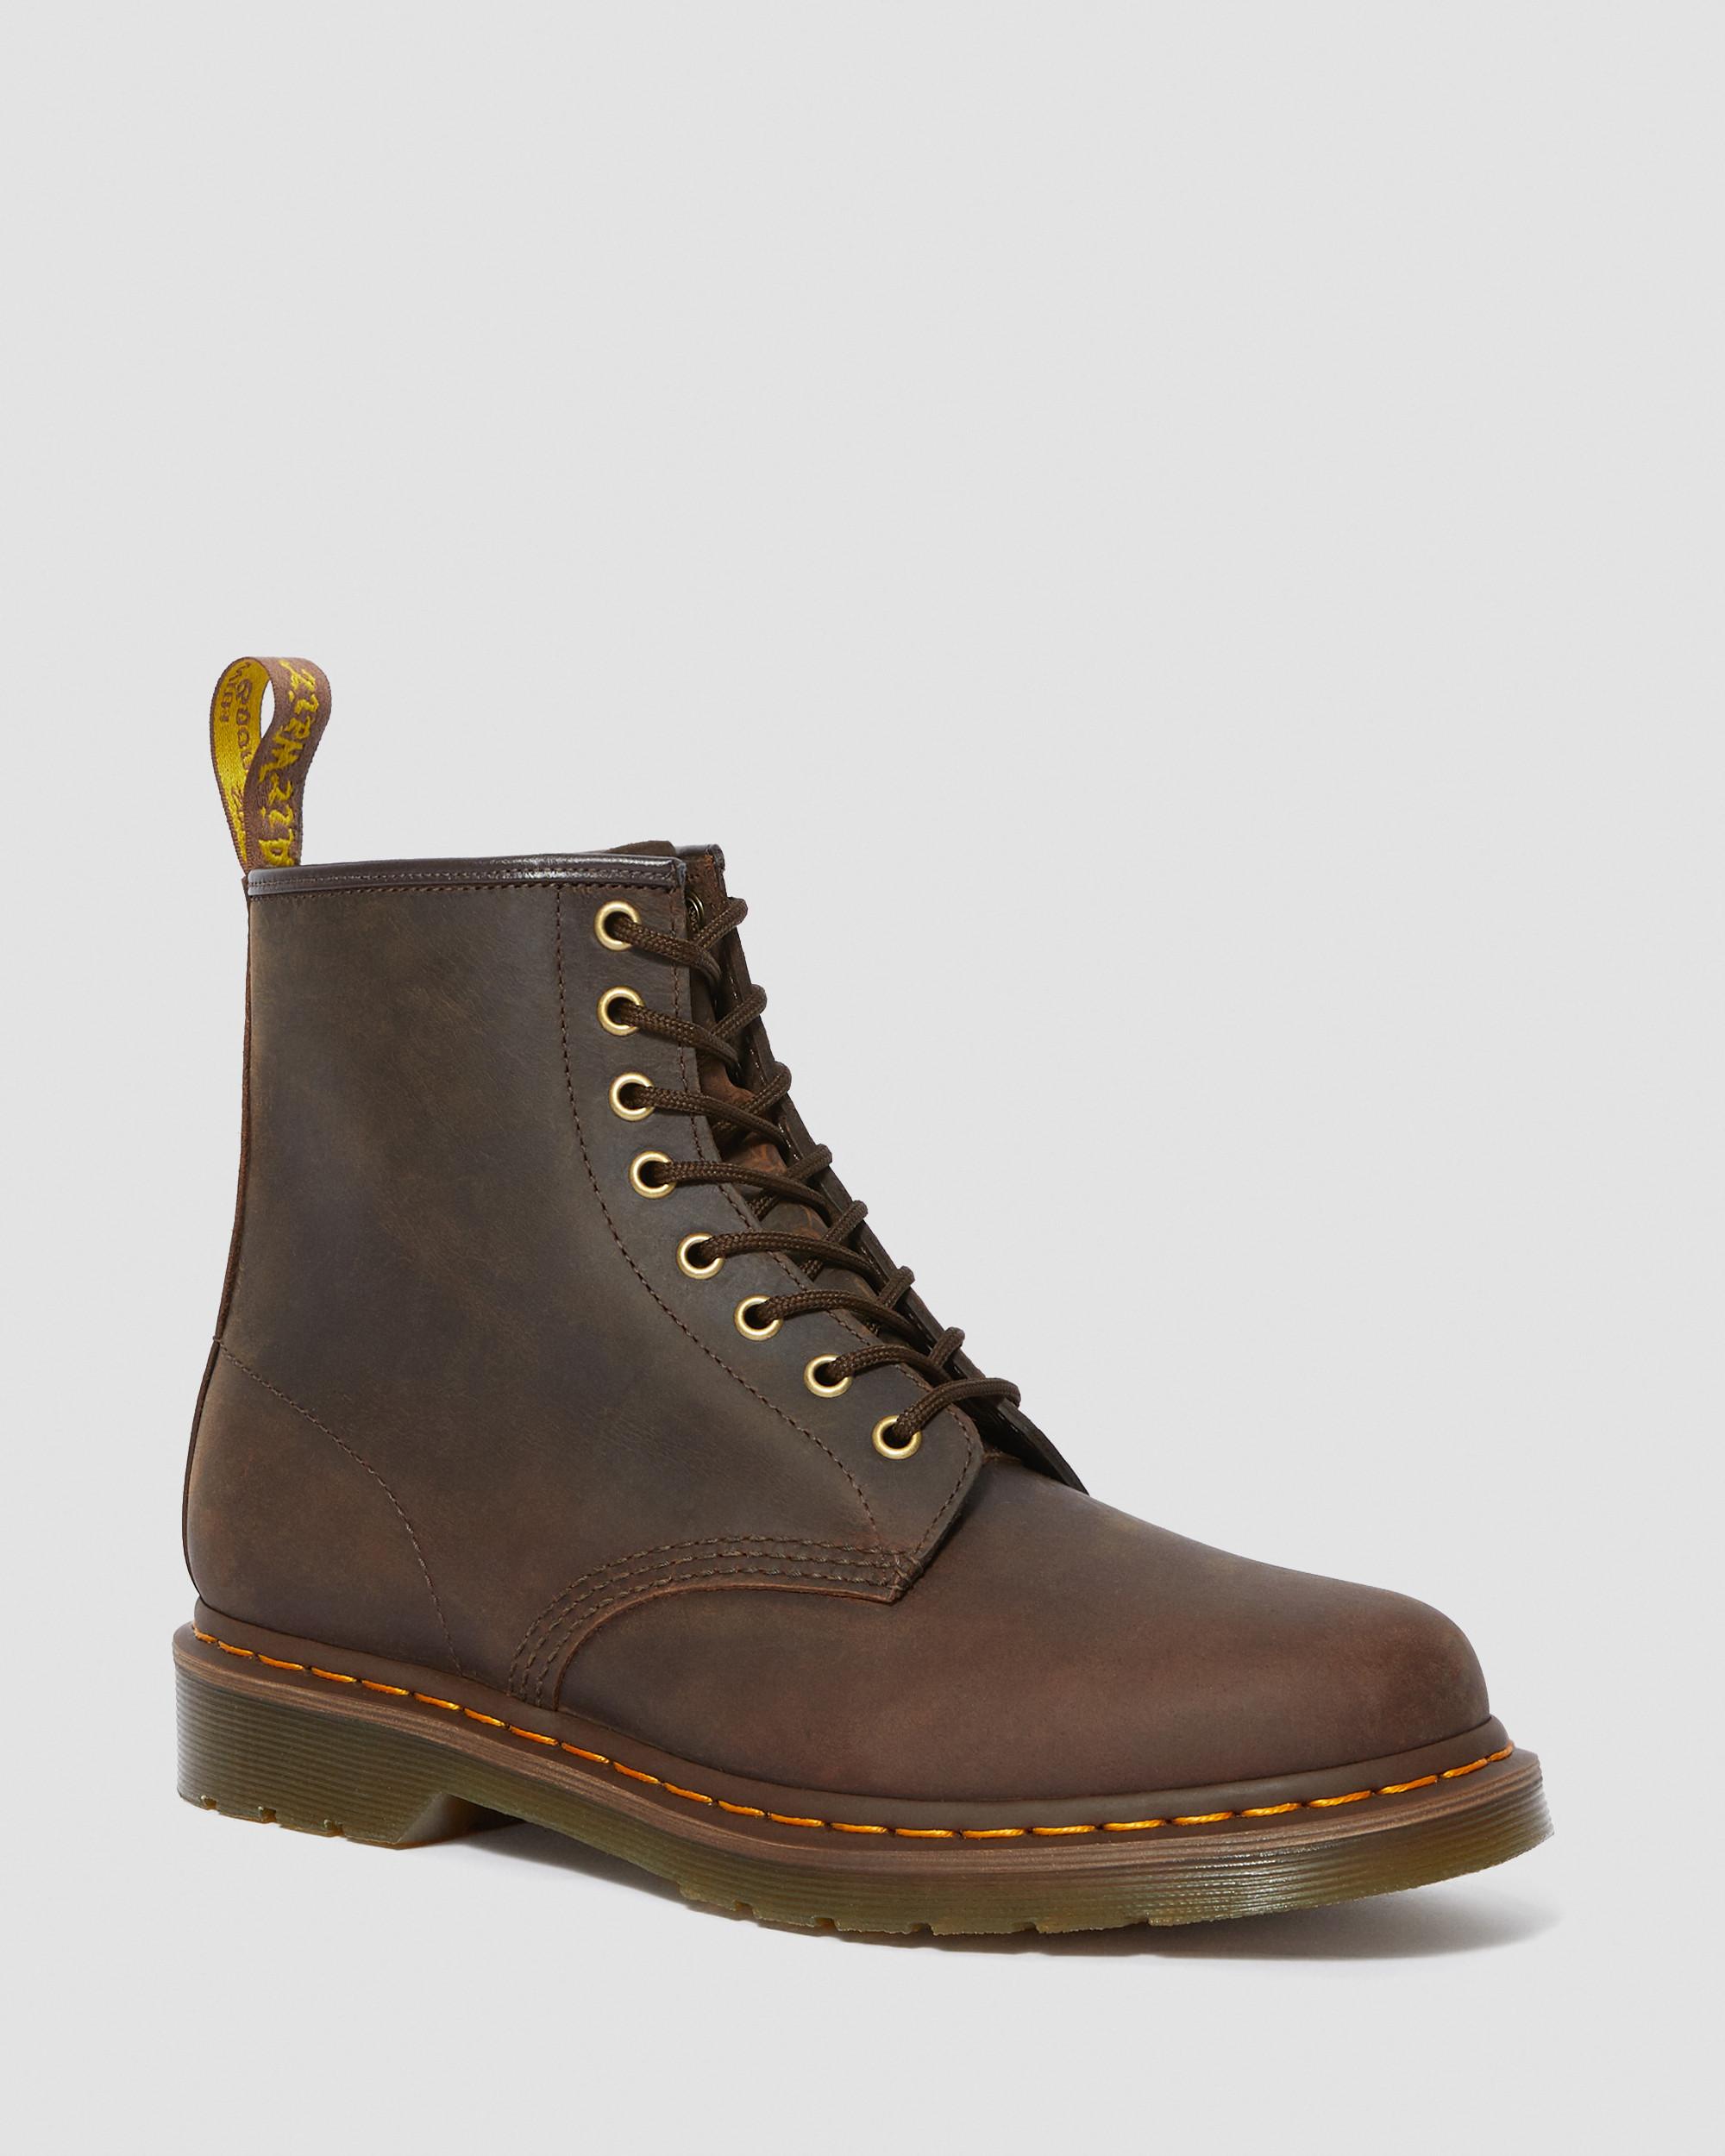 DR MARTENS 1460 Crazy Horse Leather Lace Up Boots